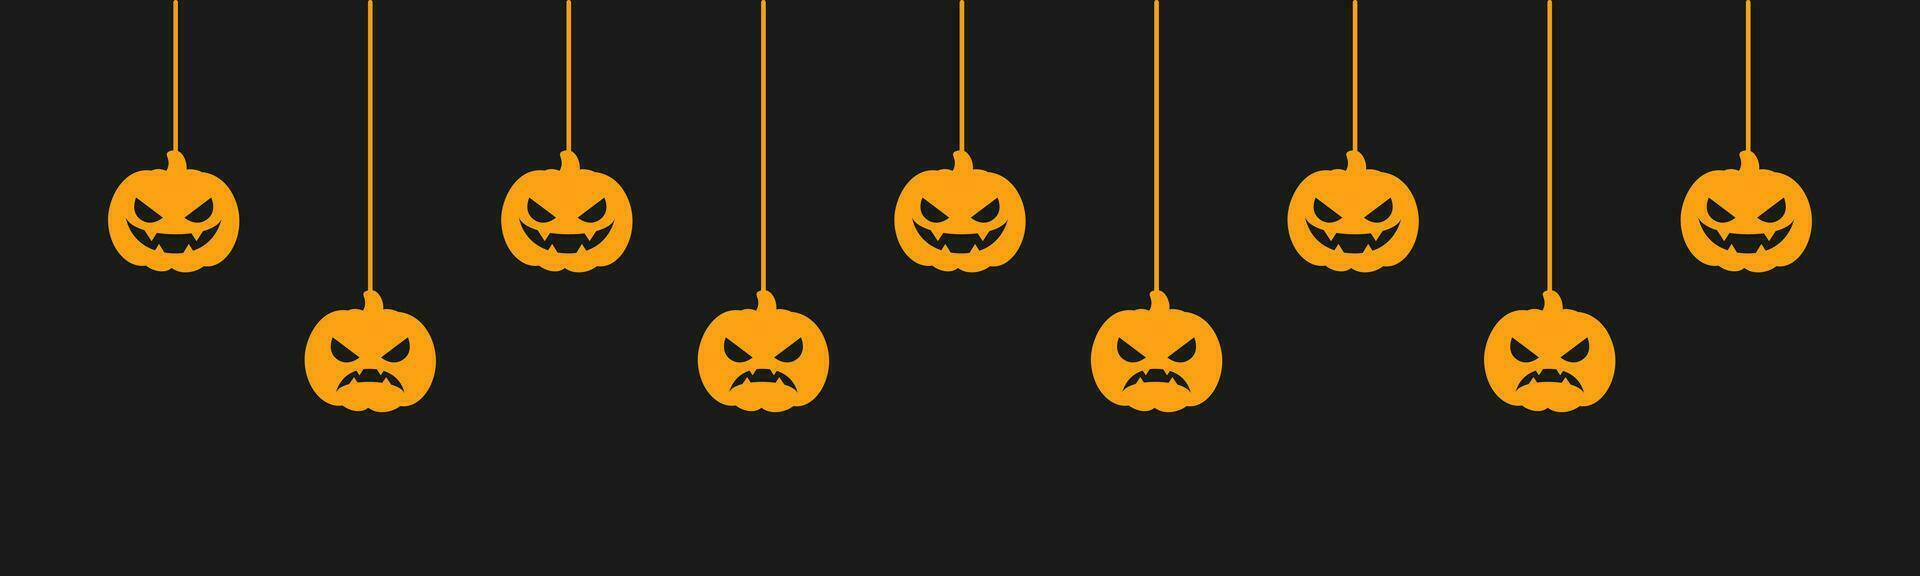 Happy Halloween banner or border with jack o lantern pumpkins silhouette. Hanging Spooky Ornaments Decoration Vector illustration, trick or treat party invitation